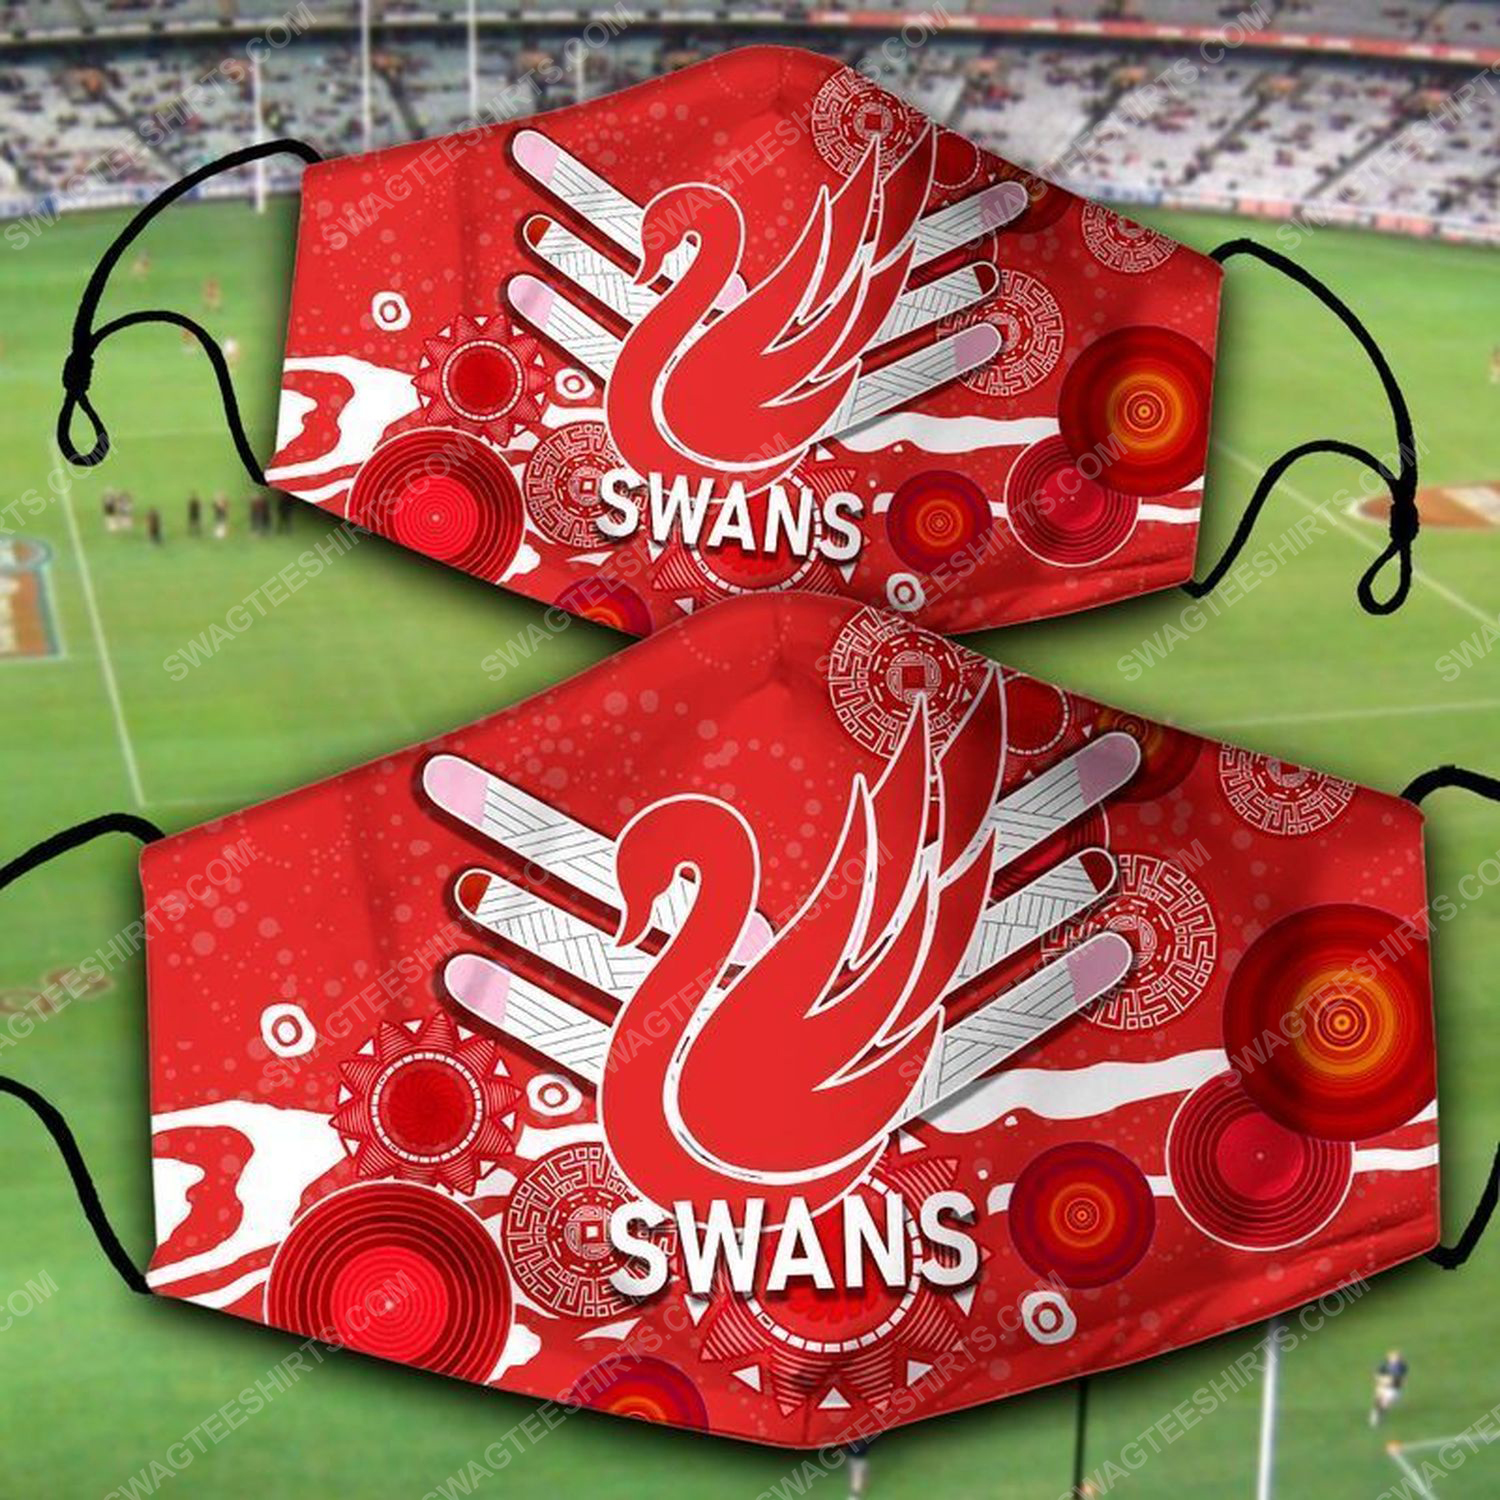 [special edition] The sydney swans football club face mask – maria